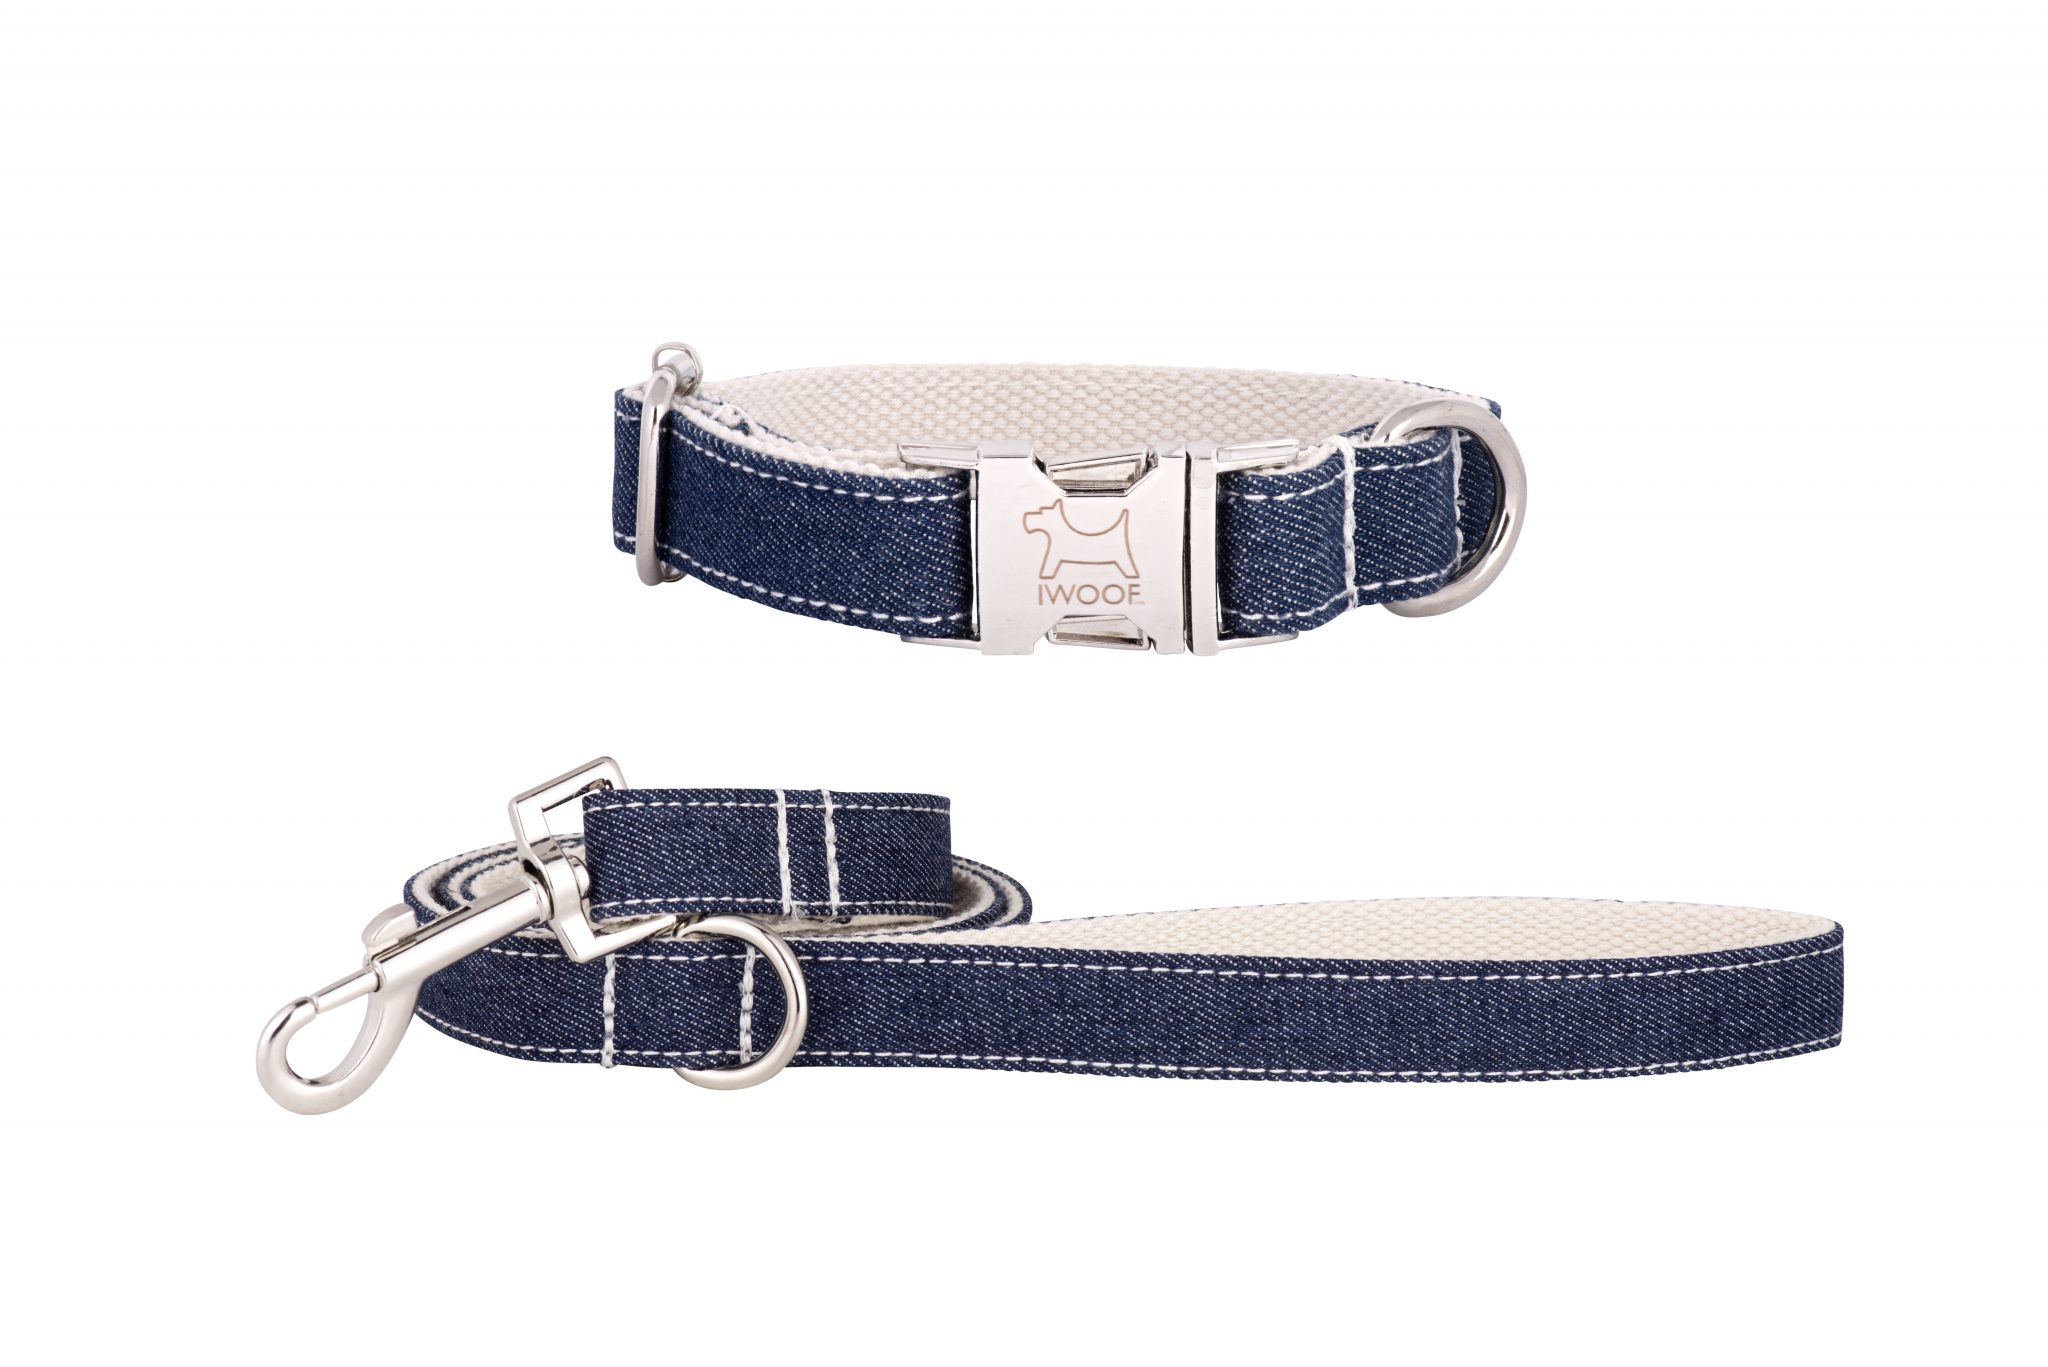 White Jean designer dog collar and matching designer dog lead by IWOOF